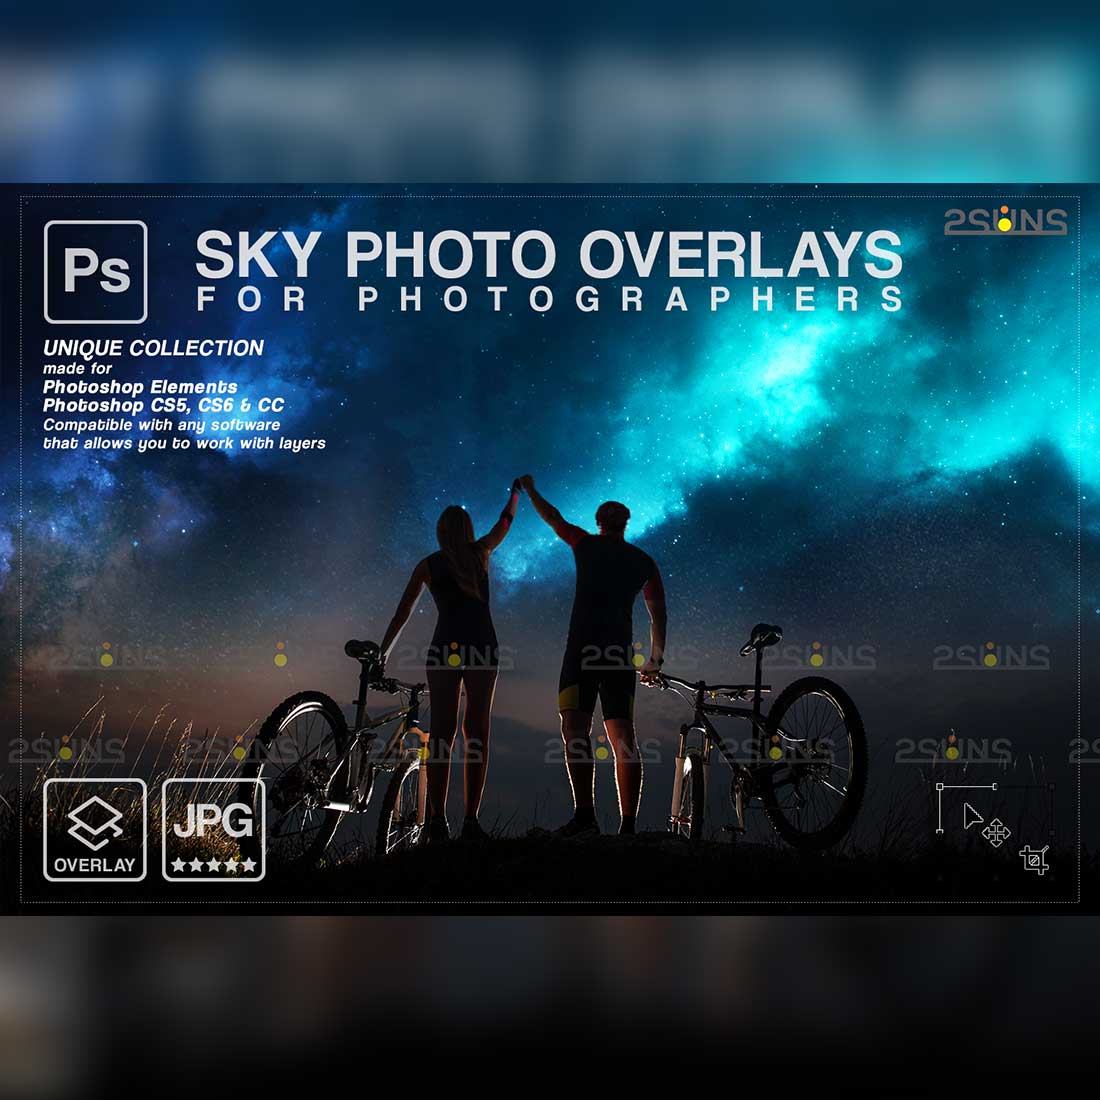 Pastel Night Sky Overlay Textures Cover image.